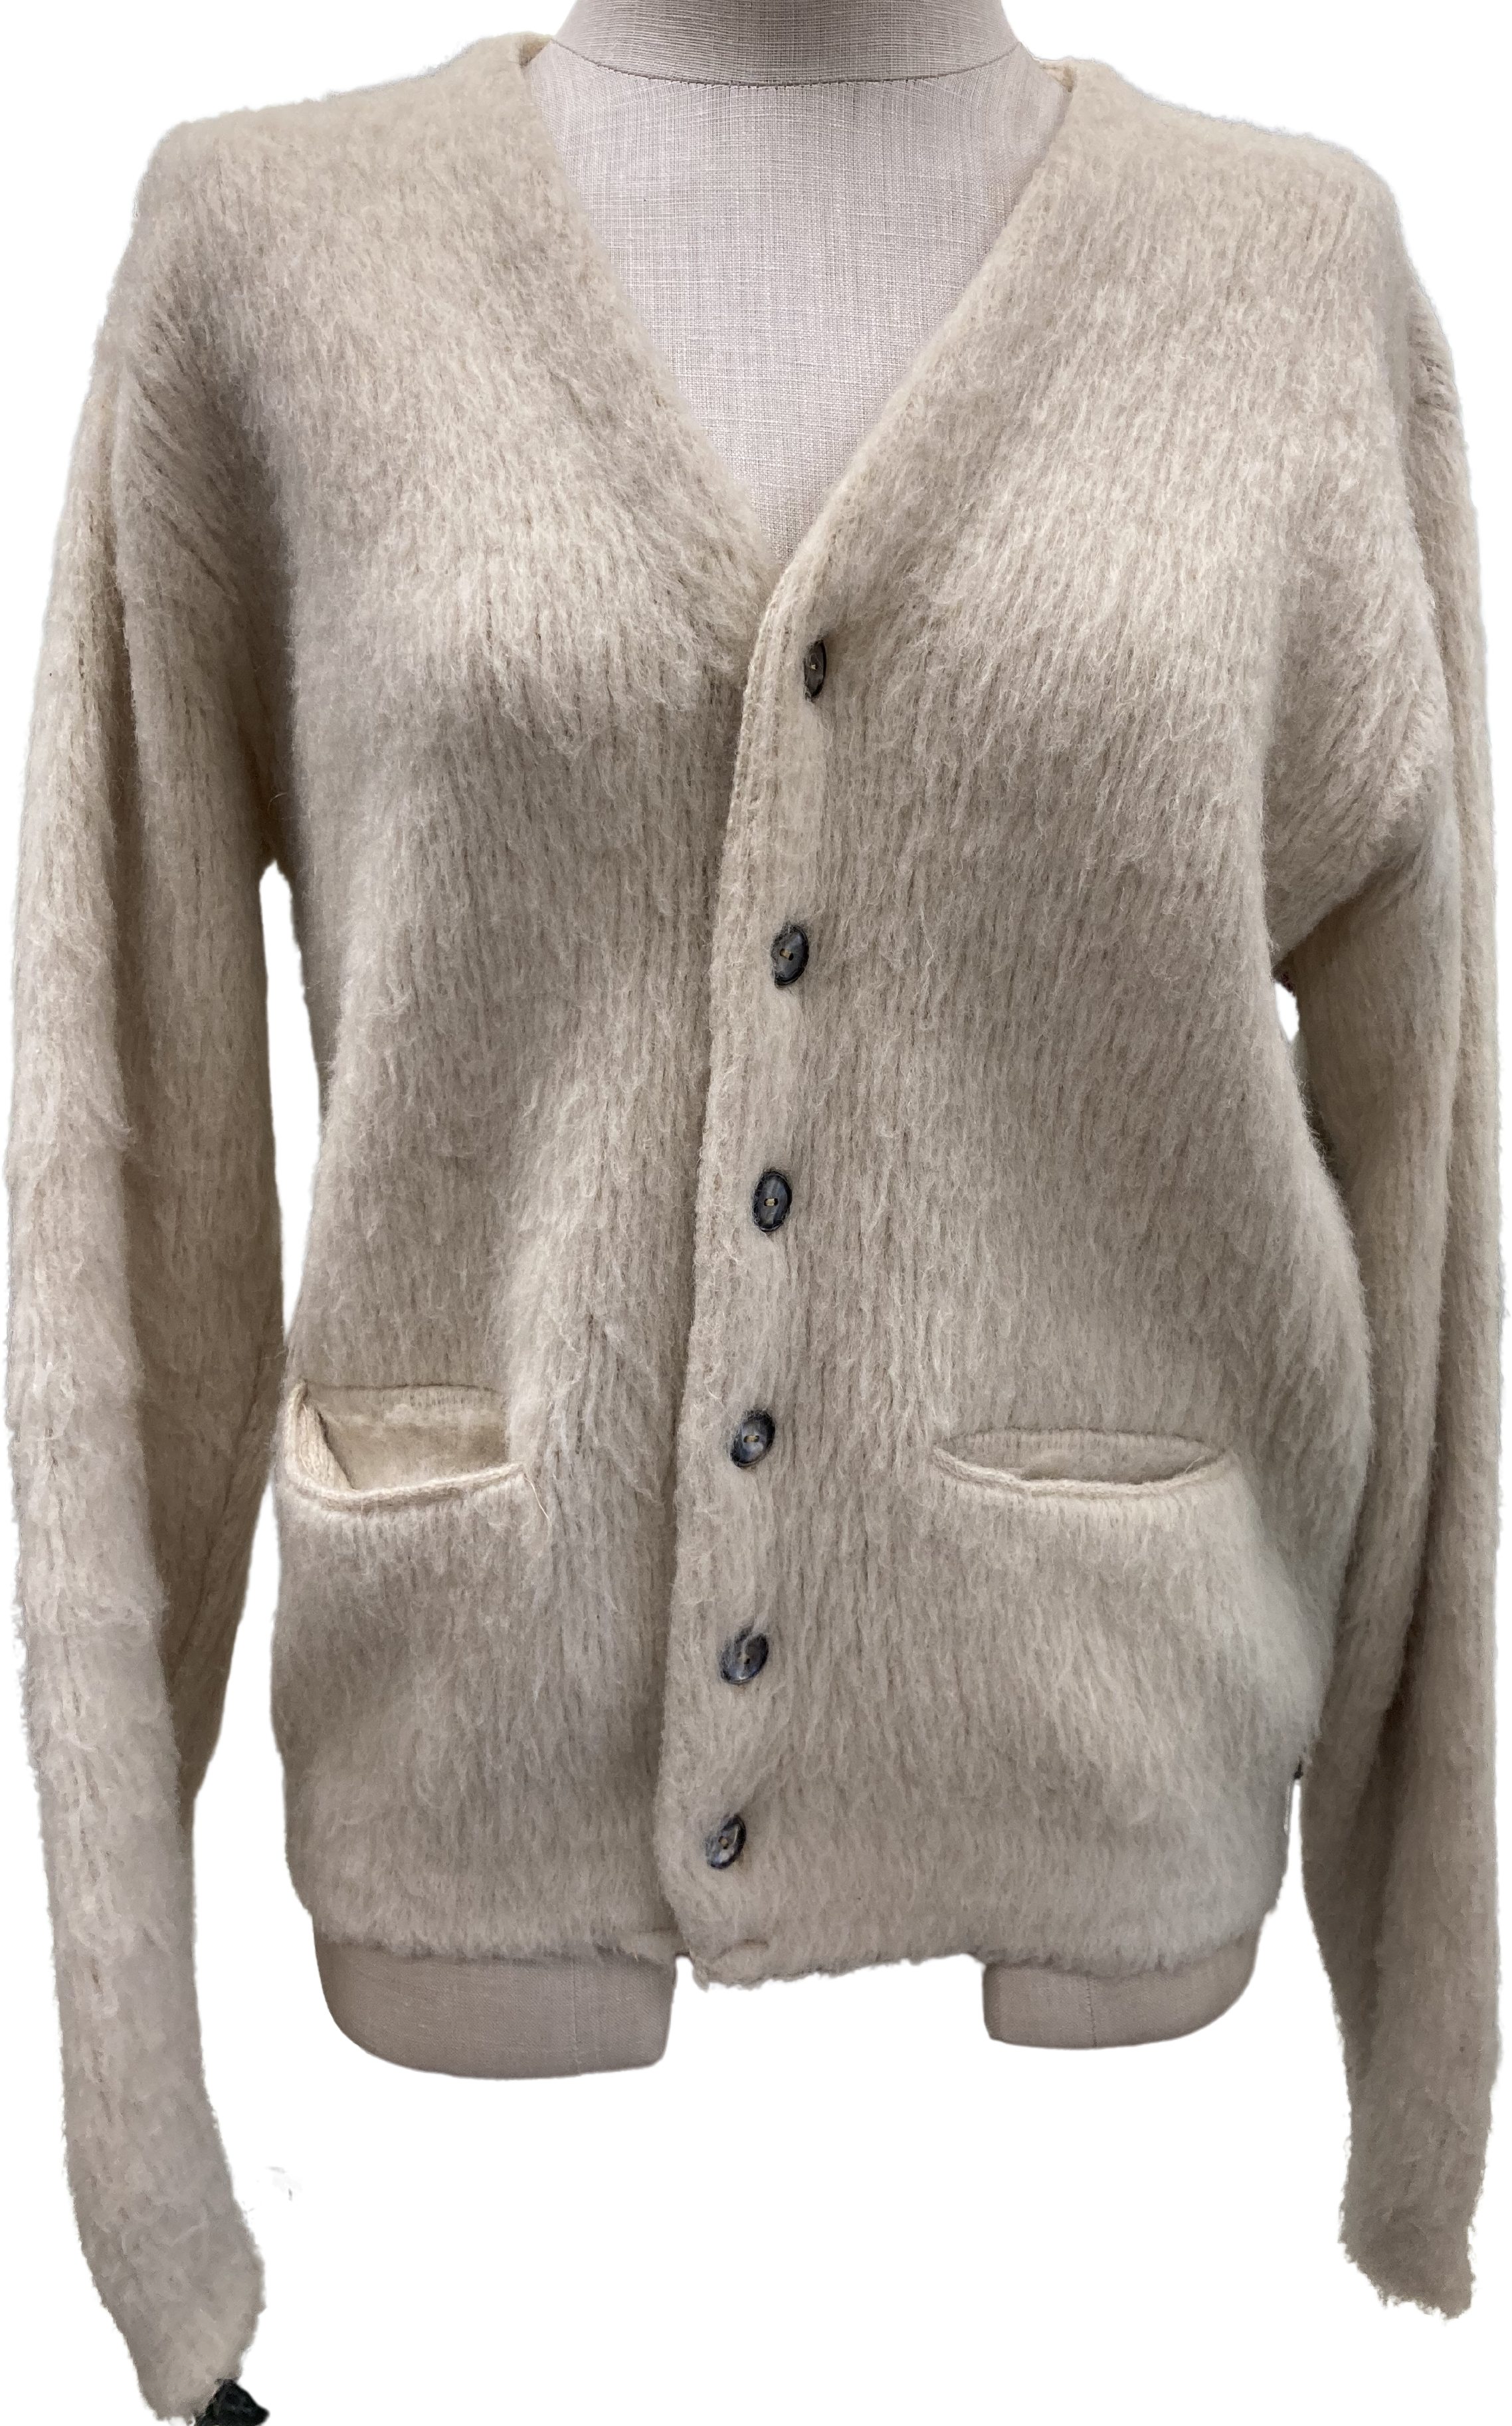 70s Acrylic Mohair Cardigan By Young Breed by Revere